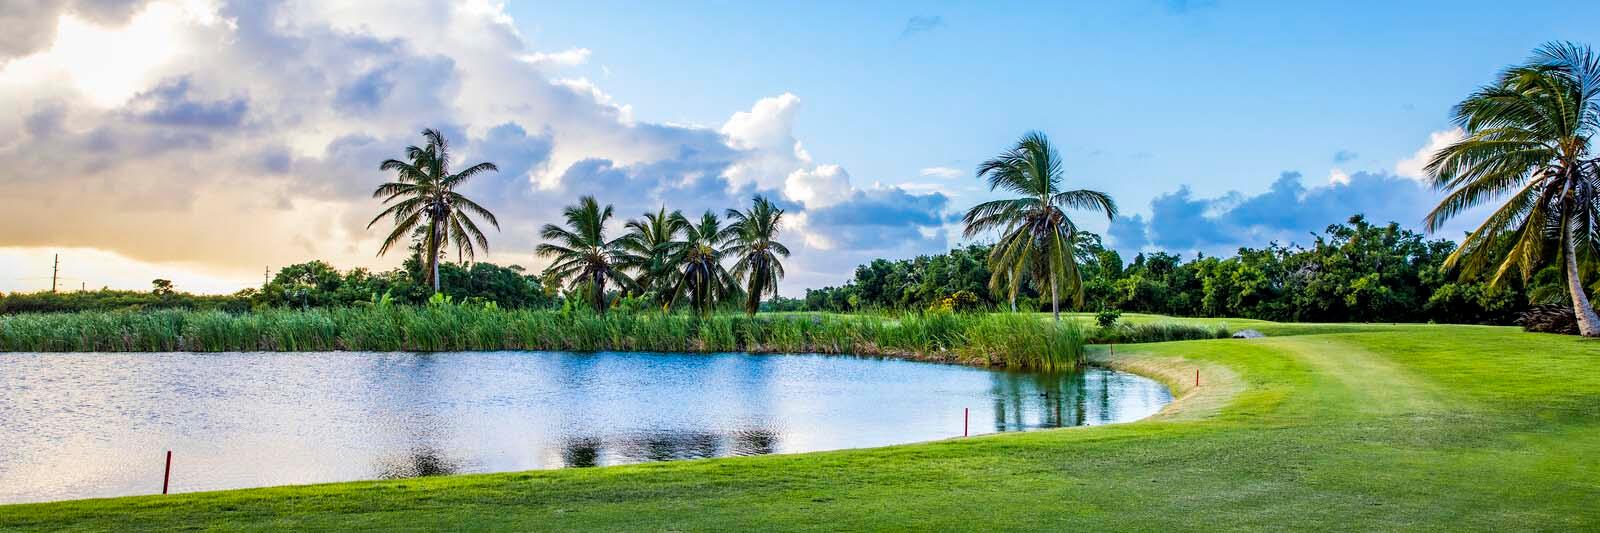 Enjoy Free Golf when Staying at Majestic Resorts in Punta Cana